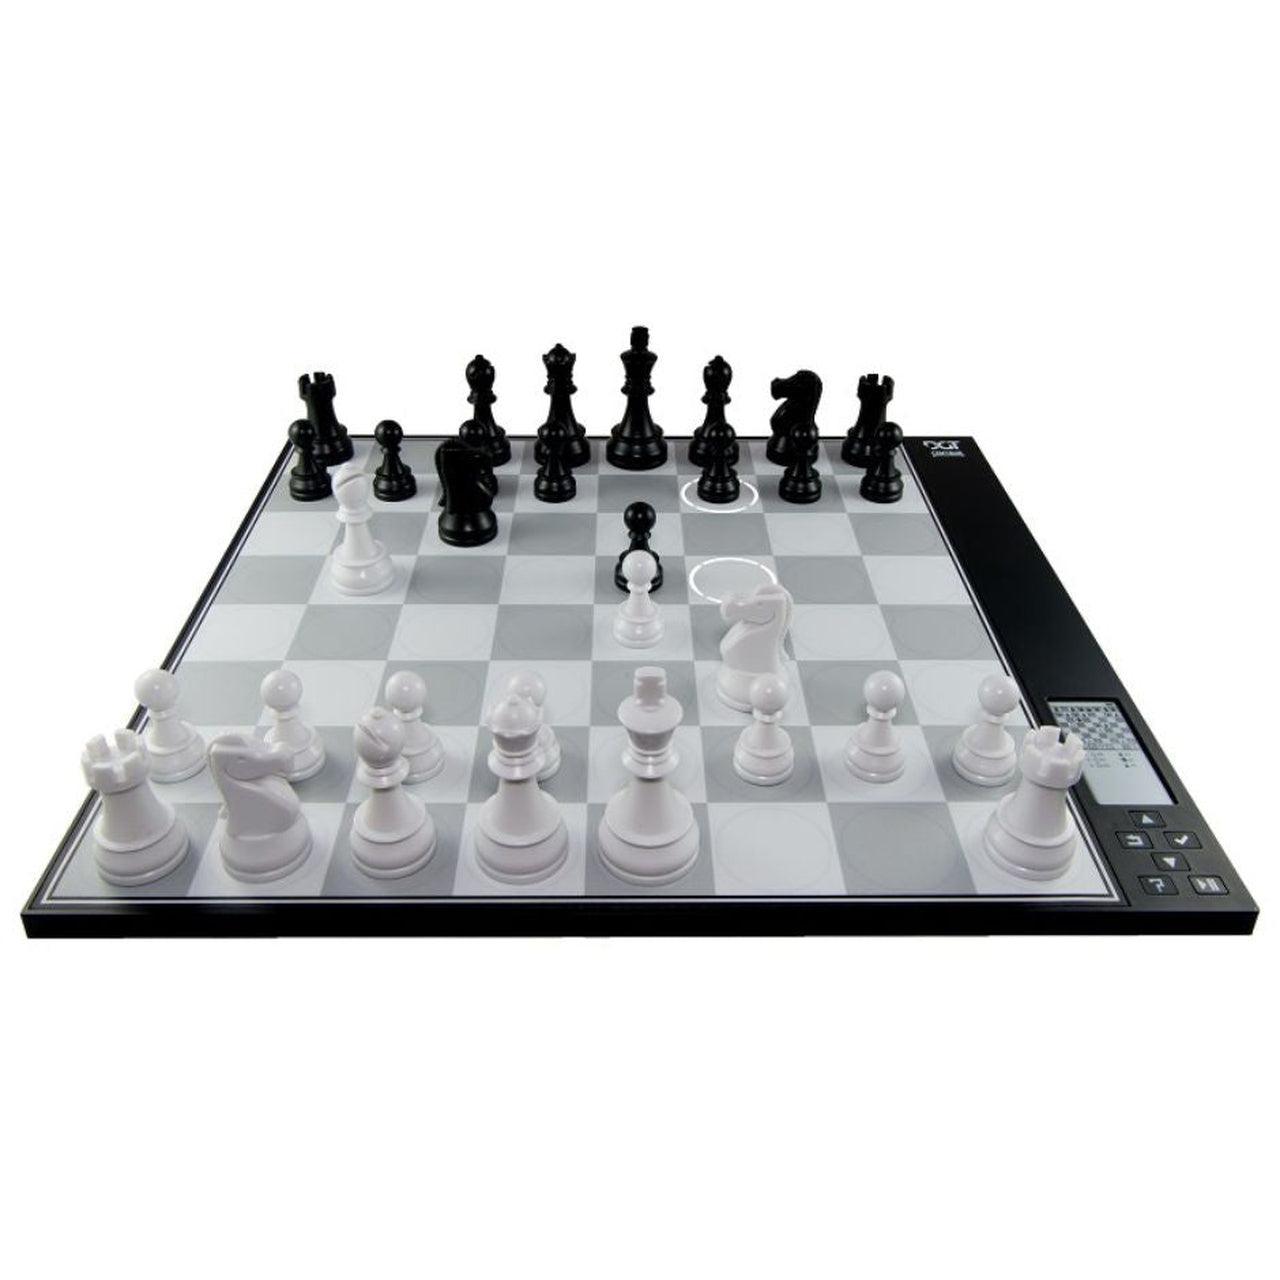 How can I play with a DGT smart board? - Chess.com Member Support and FAQs